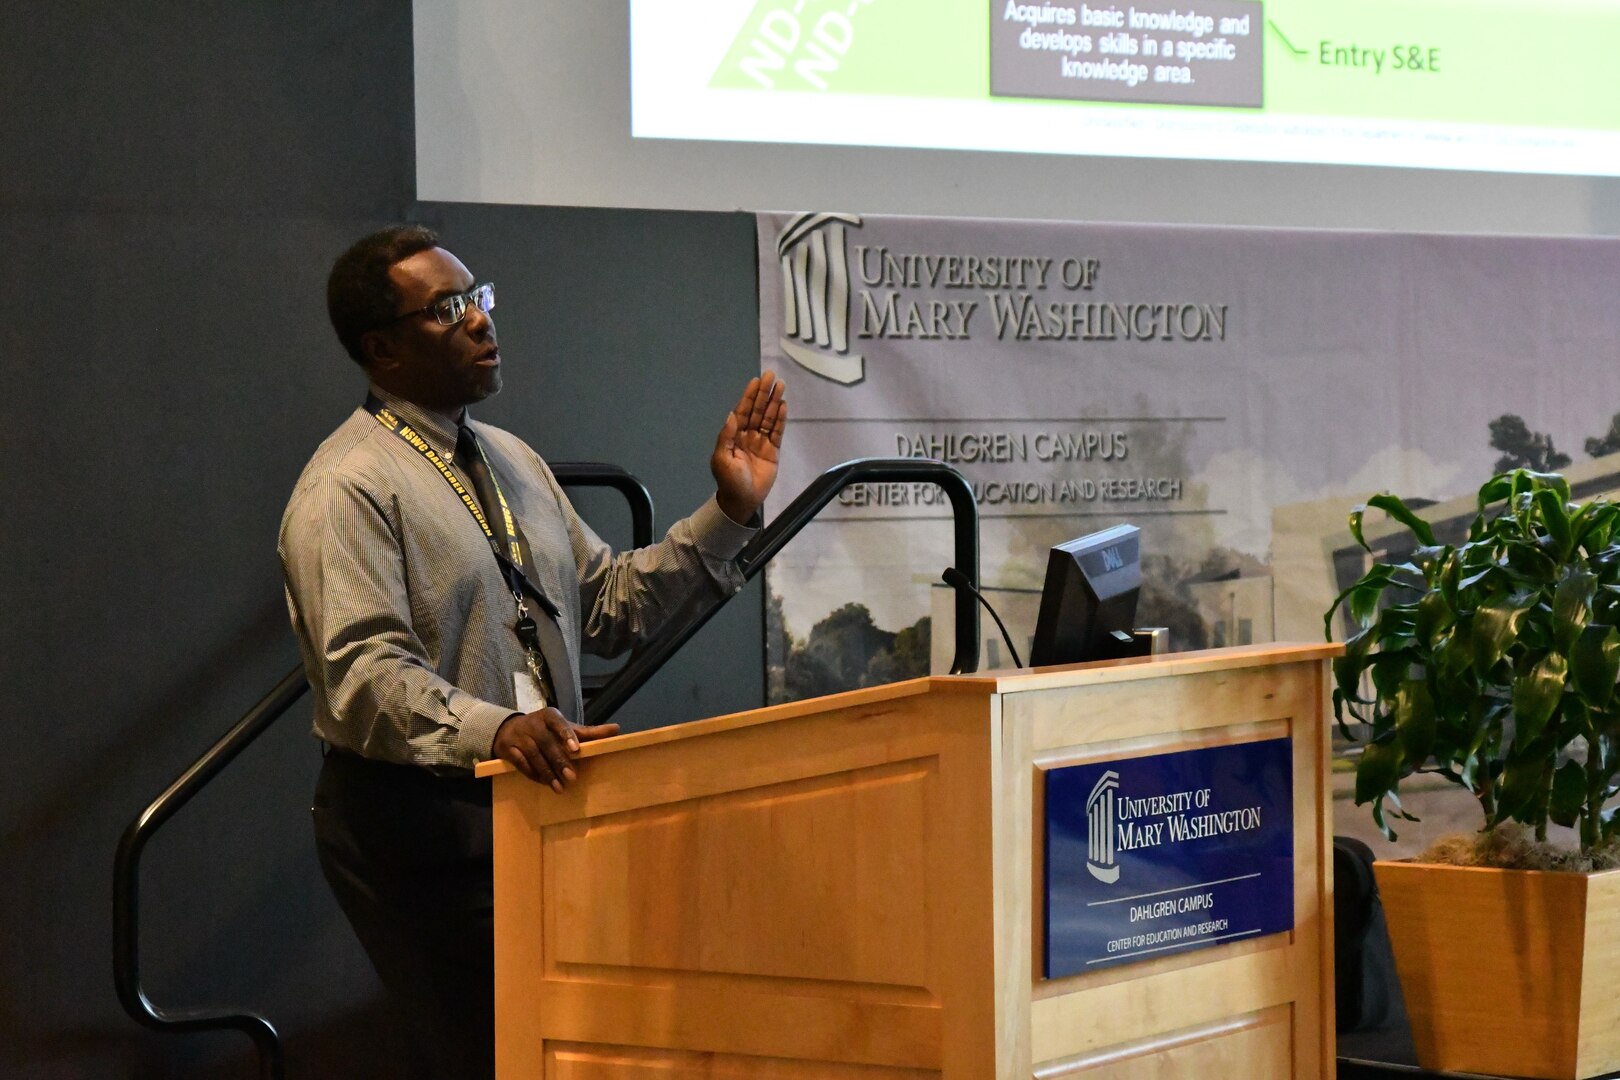 IMAGE: Aegis Based Combat Systems Development and Engineering Branch head Joel Washington speaks during the Naval Surface Warfare Center Dahlgren Division Early Career Organization Career Paths and Mentoring event, Sept. 8. Washington was the event’s guest speaker.